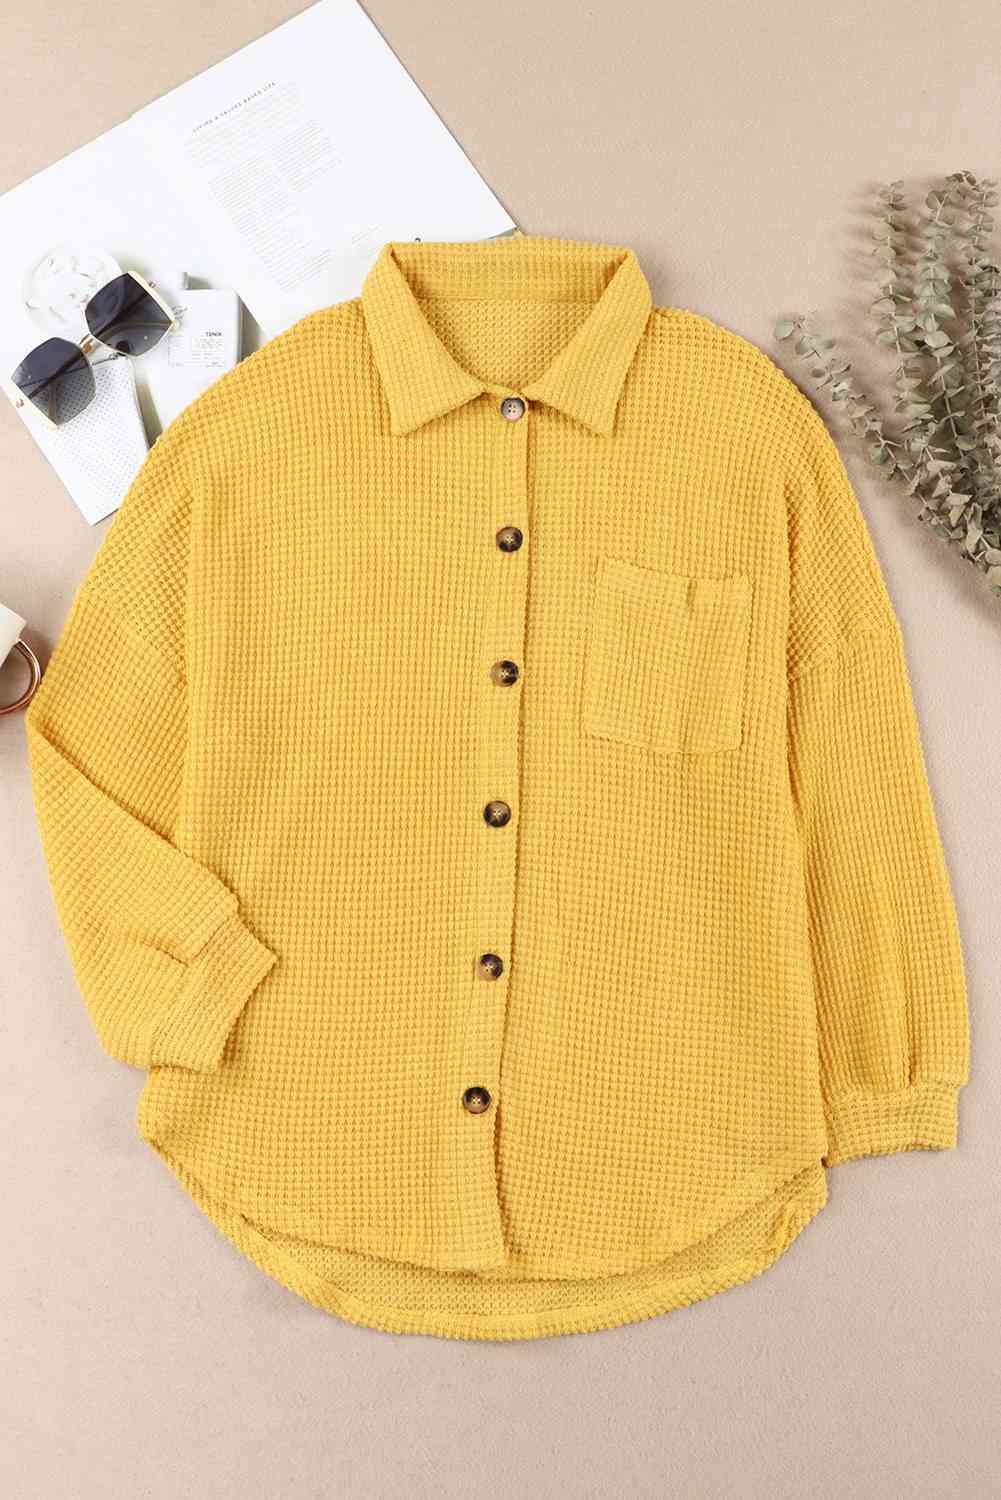 Waffle-Knit Button Up Long Sleeve Shirt with Pocket (10 Colors)  Krazy Heart Designs Boutique   